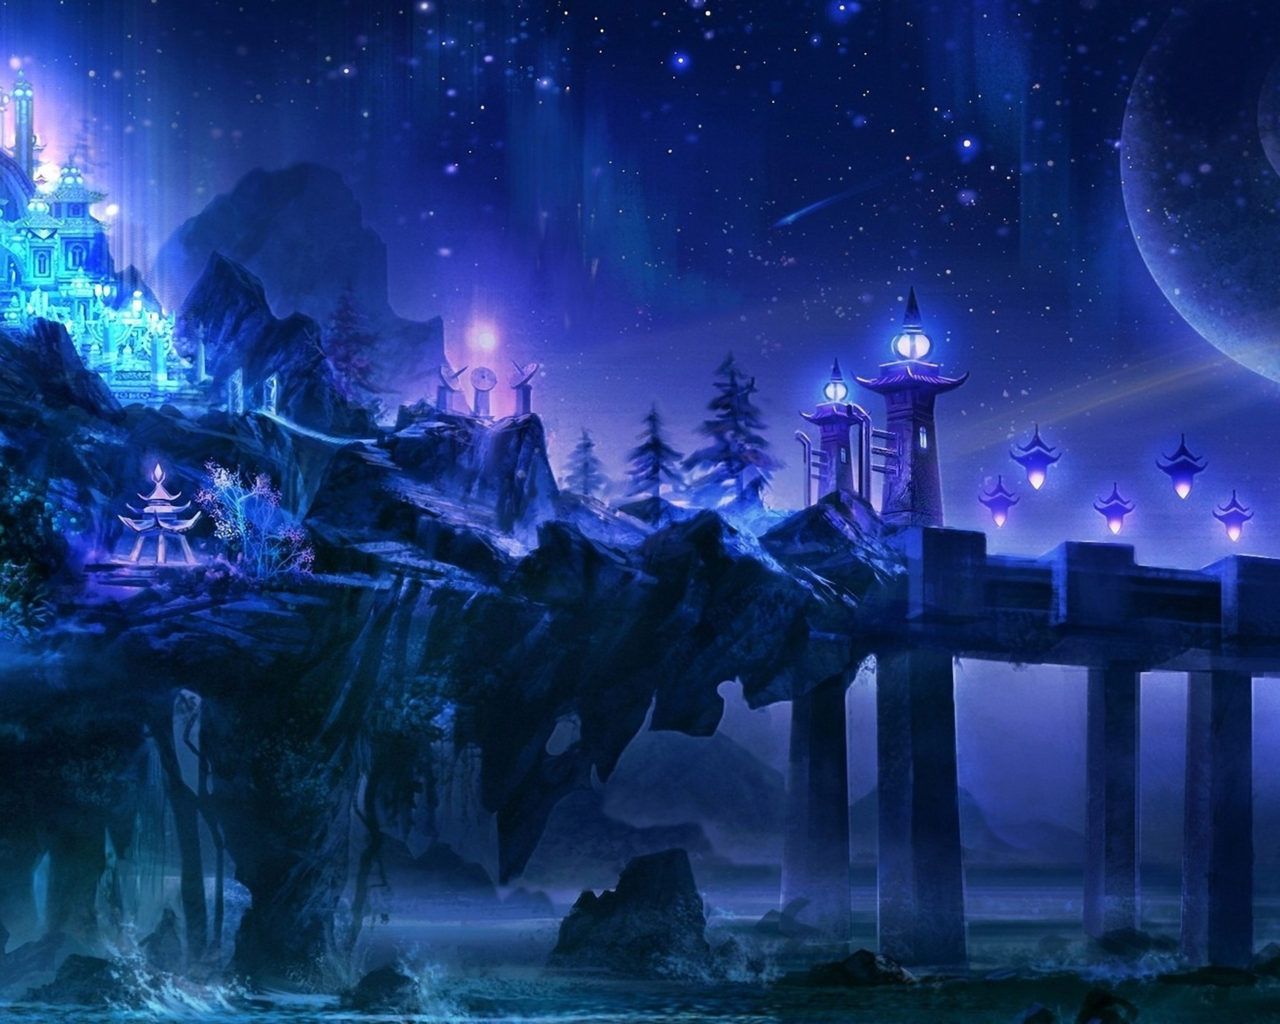 A fantasy castle with blue lighting and stars - Rock